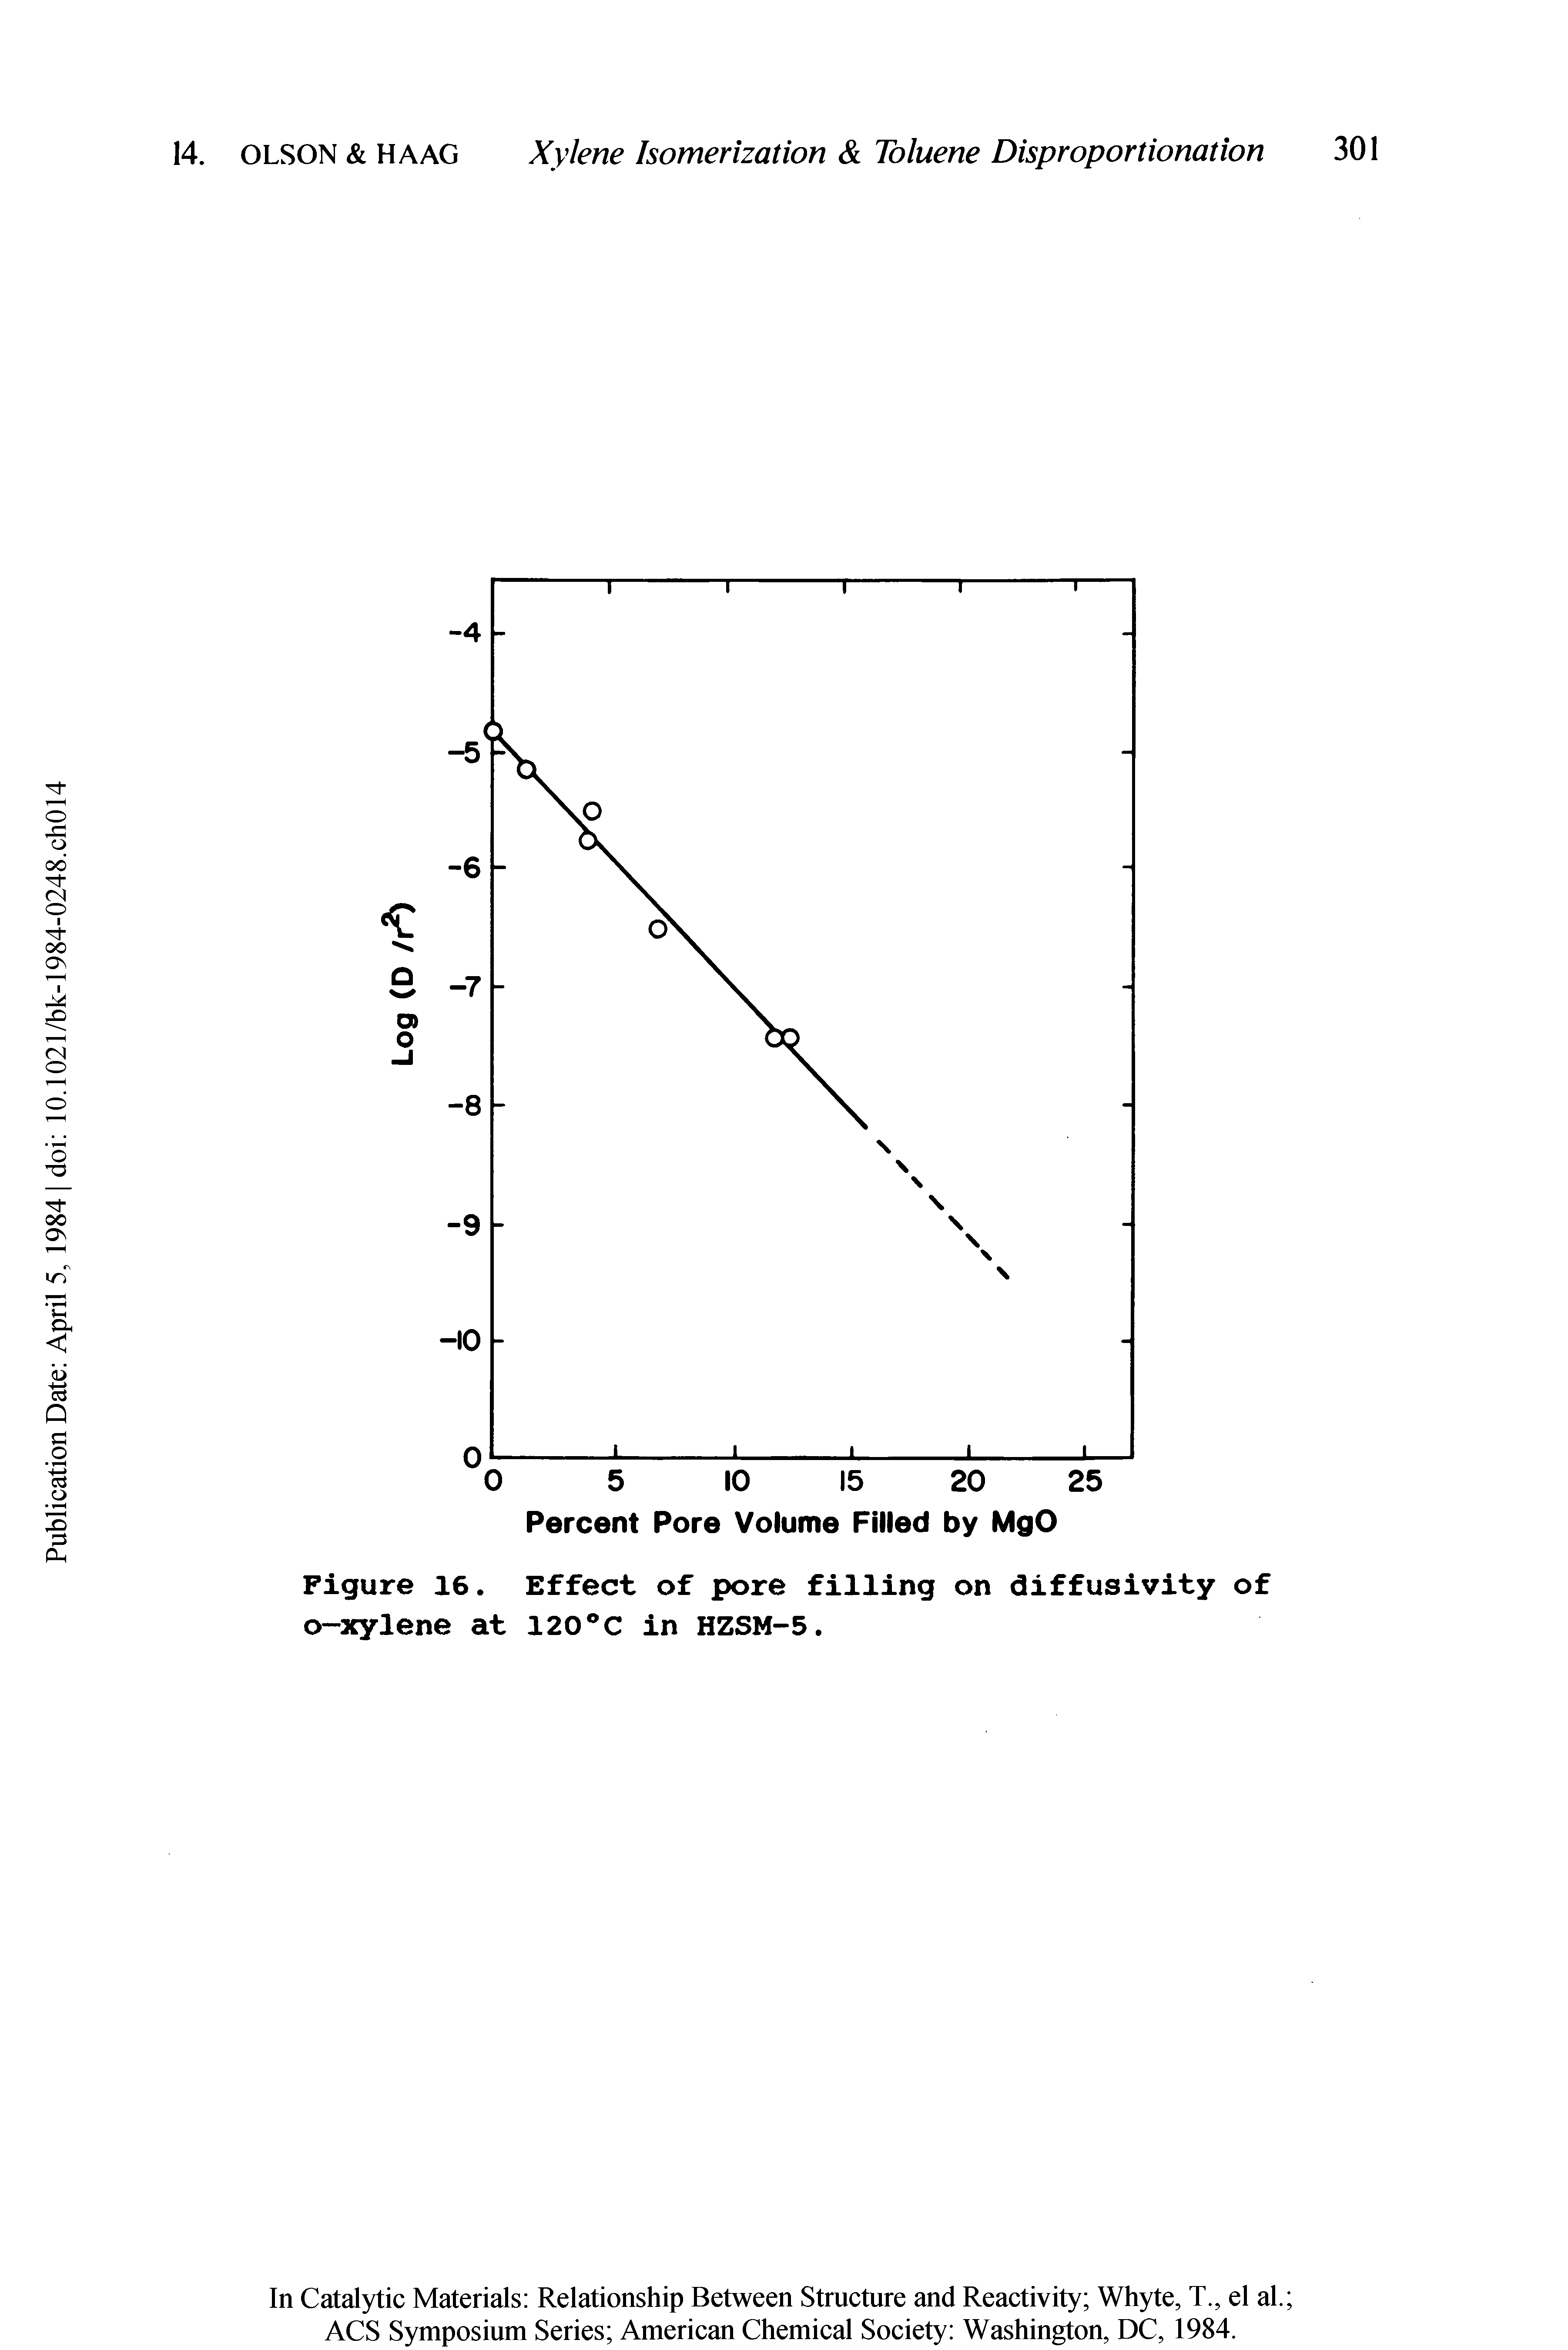 Figure 16. Effect of pore filling on diffusivity of o-xylene at 120°C in HZSM-5.